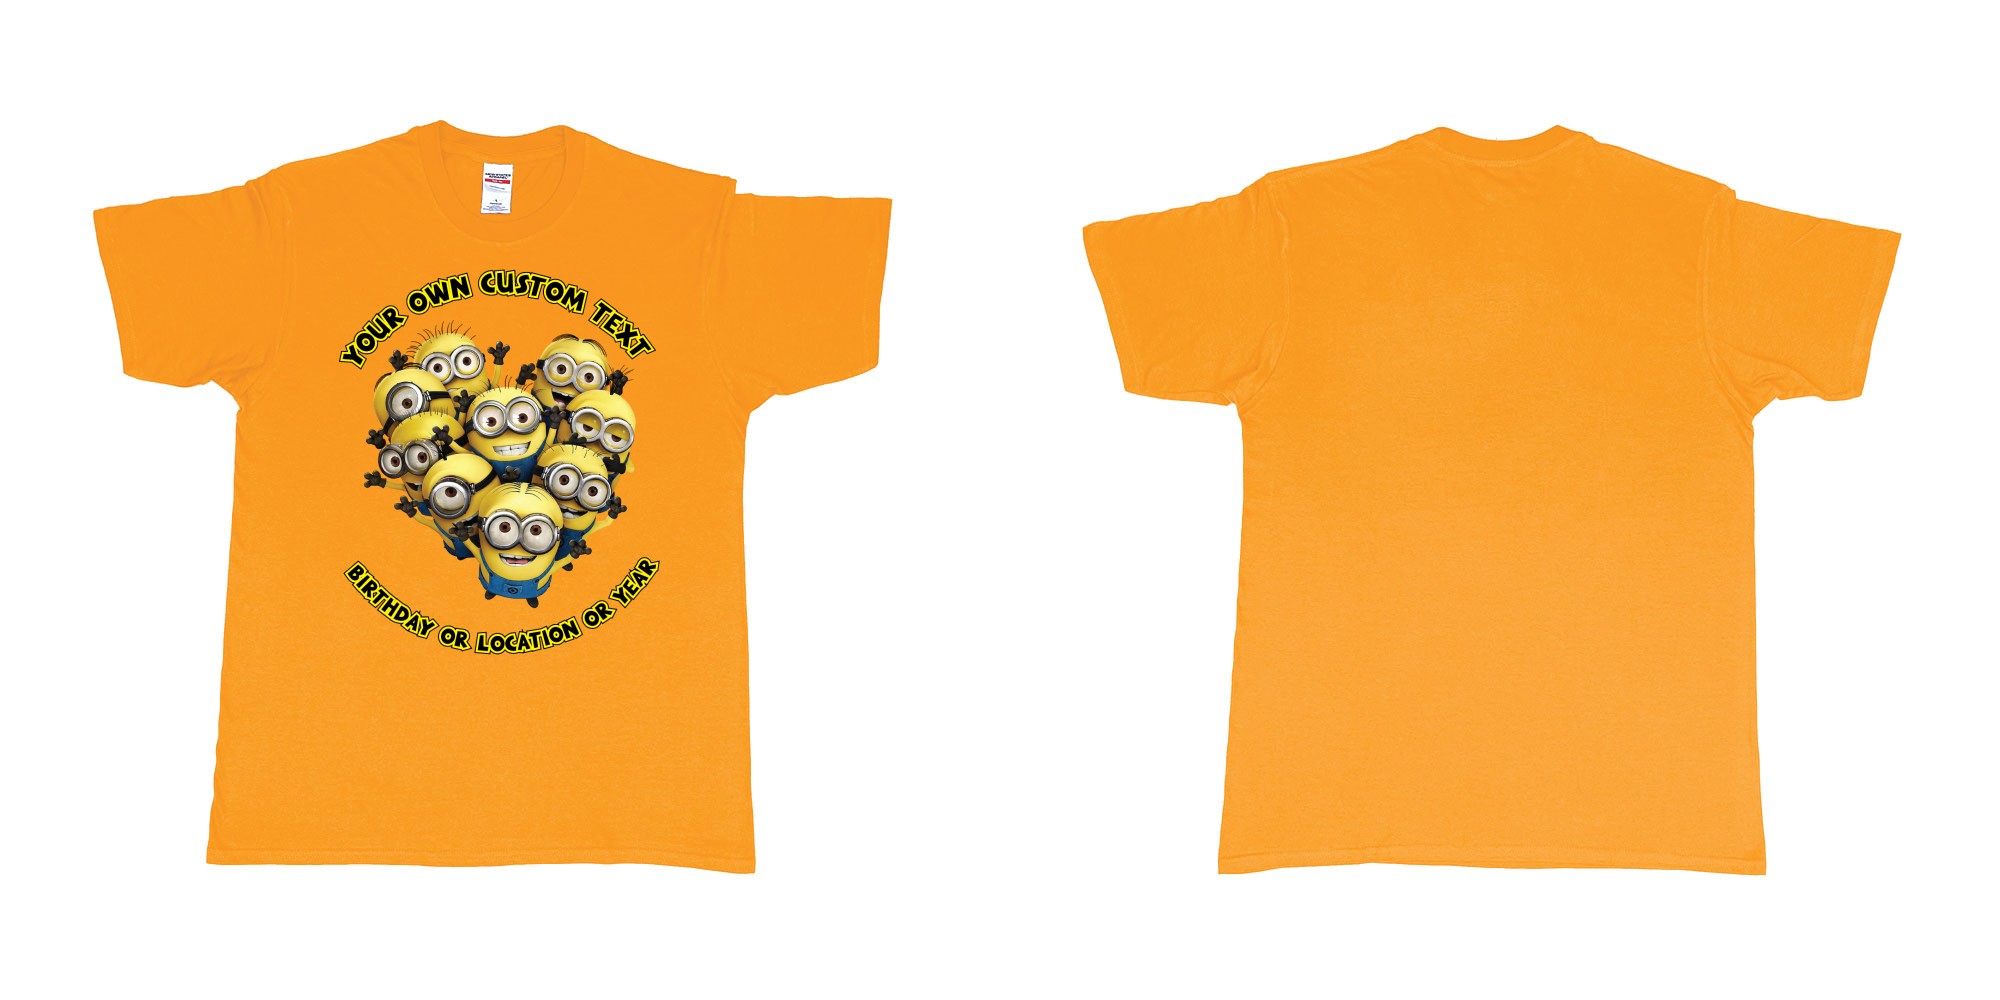 Custom tshirt design minions celebrating you in fabric color gold choice your own text made in Bali by The Pirate Way